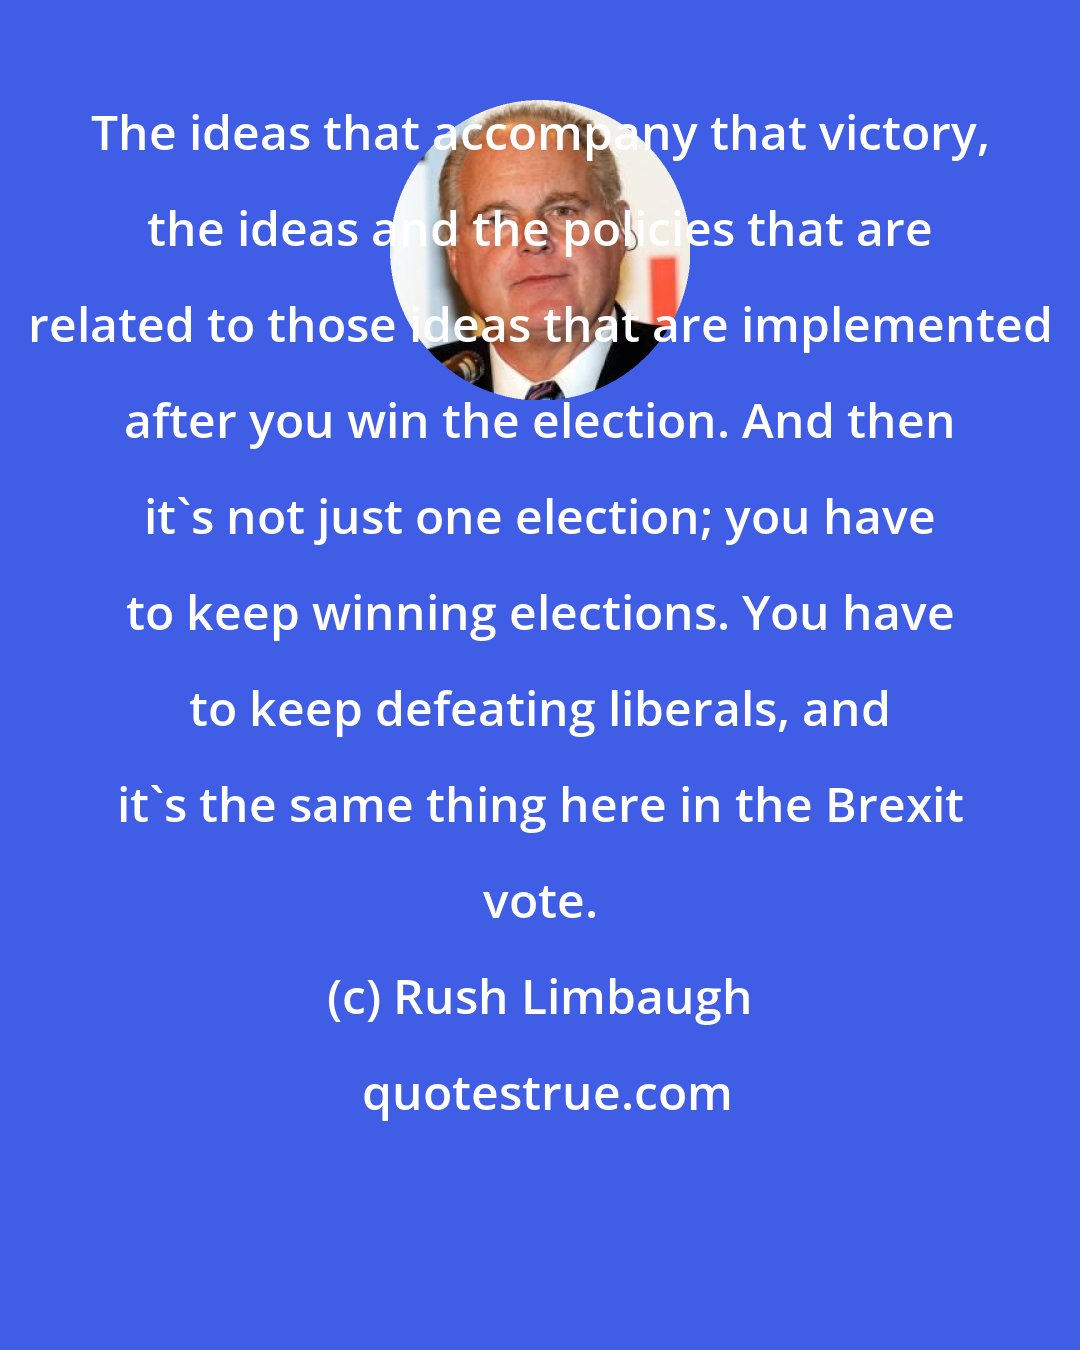 Rush Limbaugh: The ideas that accompany that victory, the ideas and the policies that are related to those ideas that are implemented after you win the election. And then it's not just one election; you have to keep winning elections. You have to keep defeating liberals, and it's the same thing here in the Brexit vote.